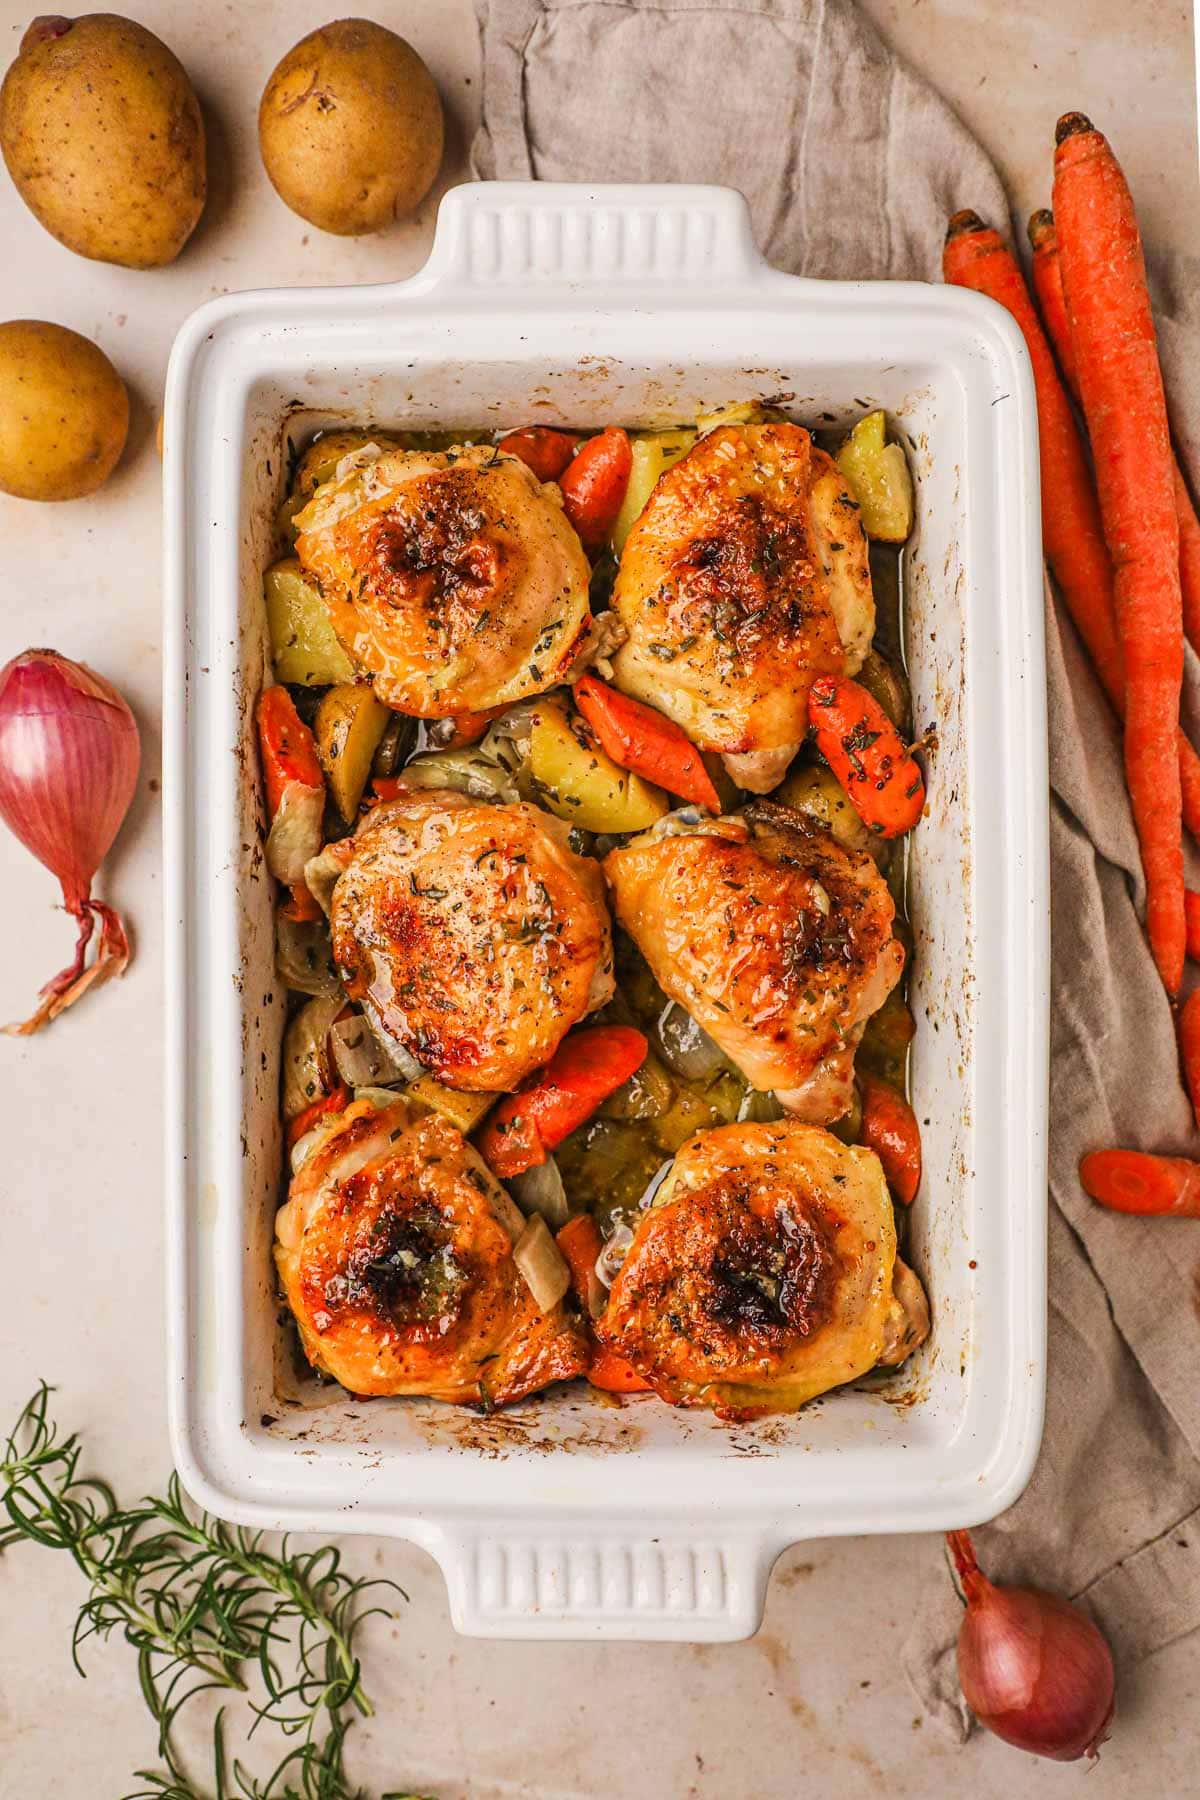 Roasted chicken thighs with crispy skin and vegetables roasted in an olive oil, whole grain dijon mustard, honey, and rosemary.